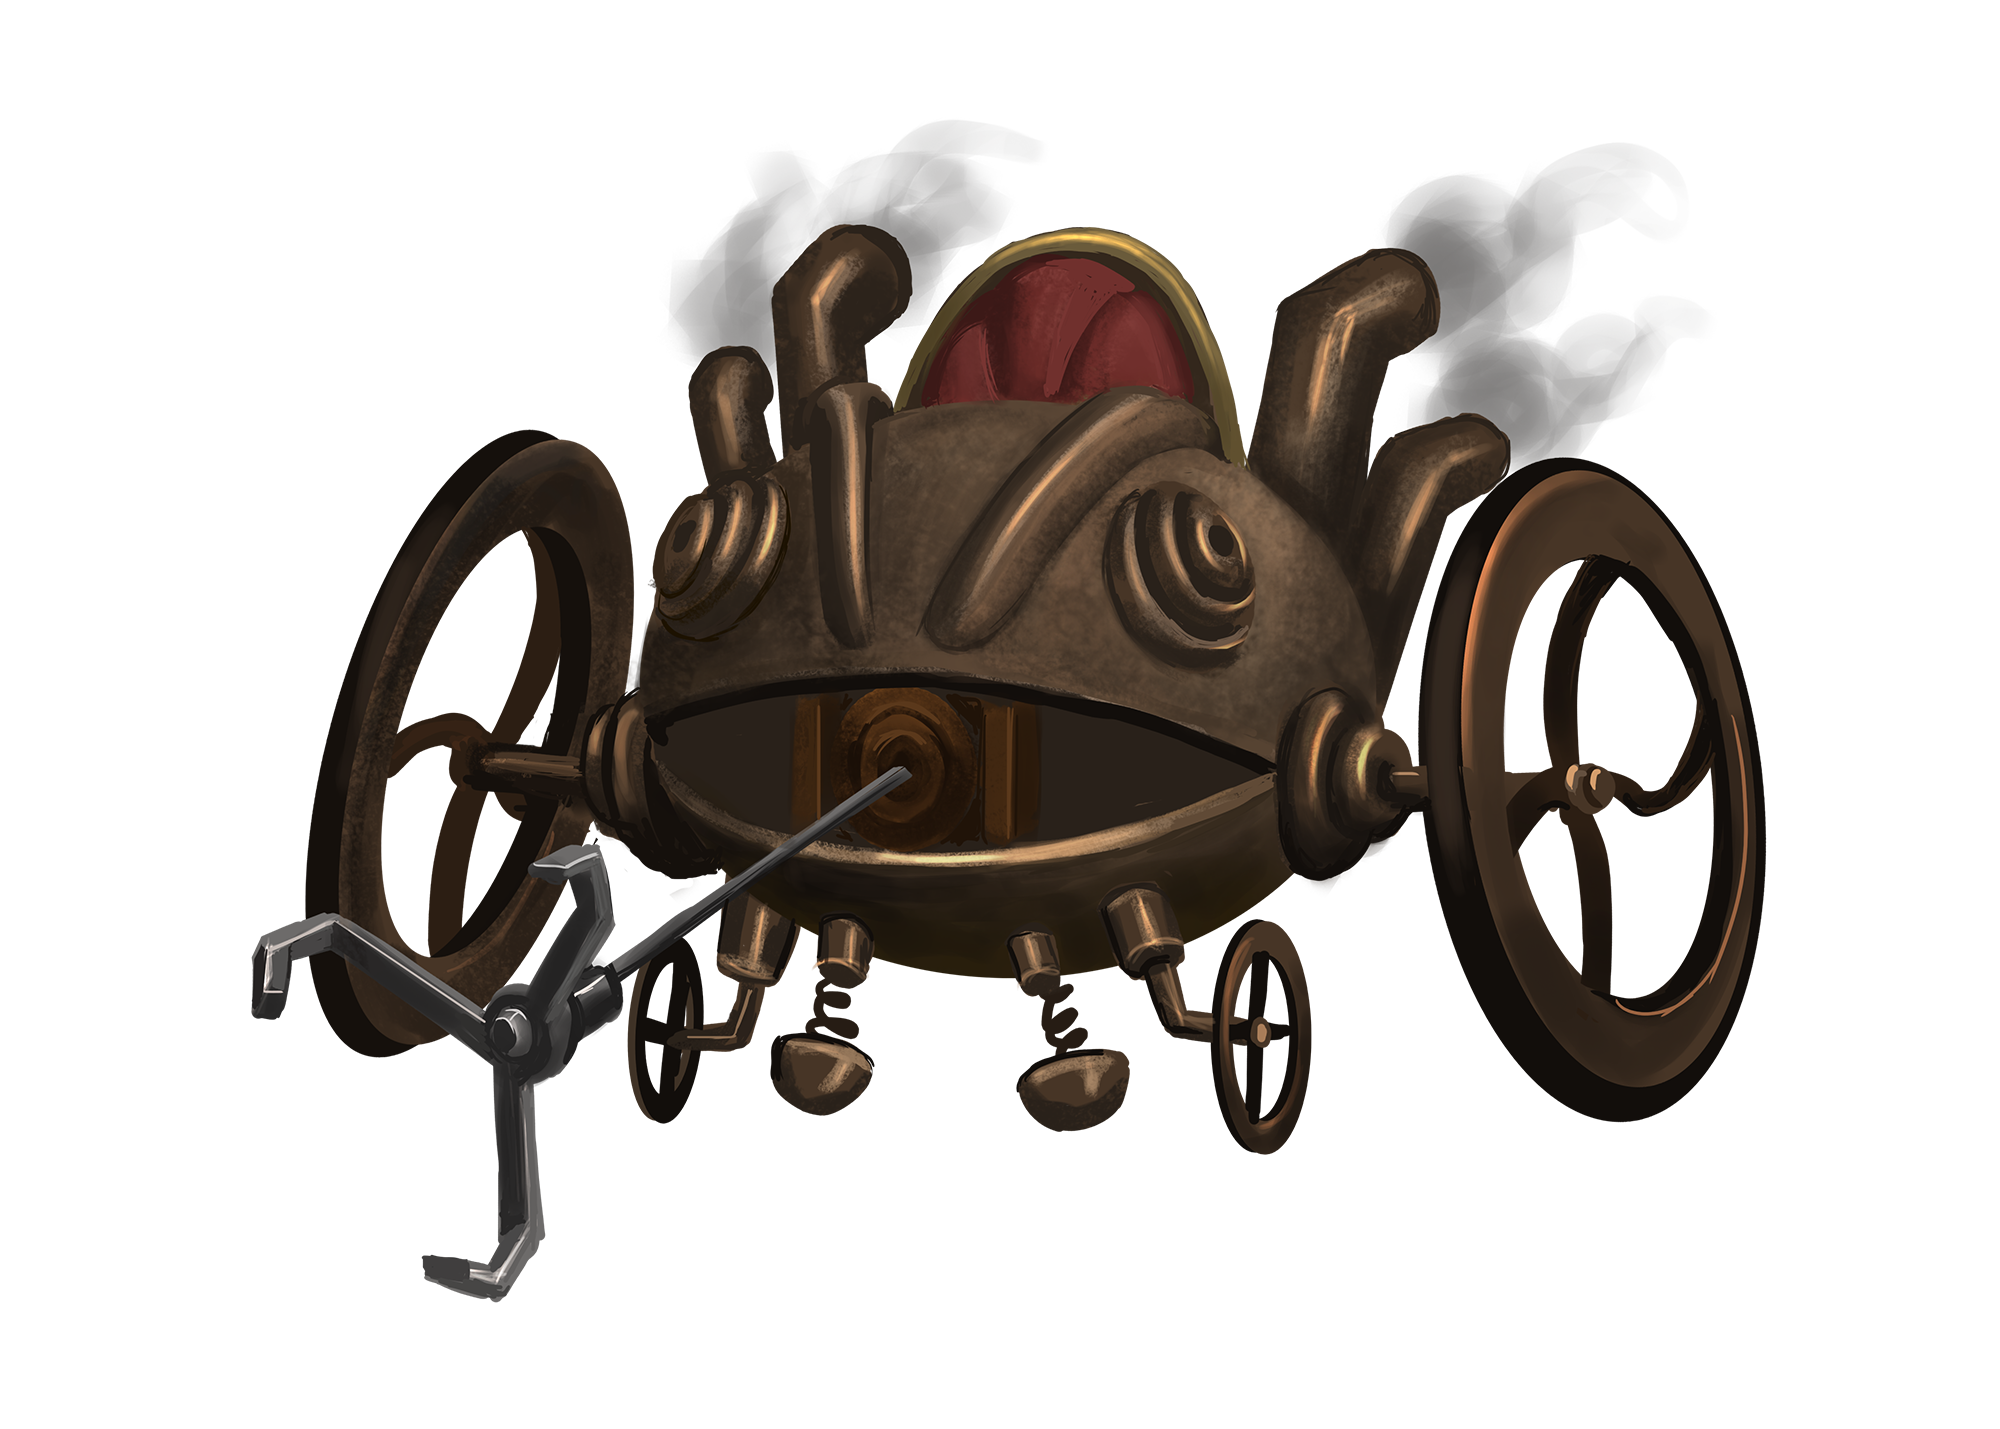 A steam powered wheelchair shaped like a frog